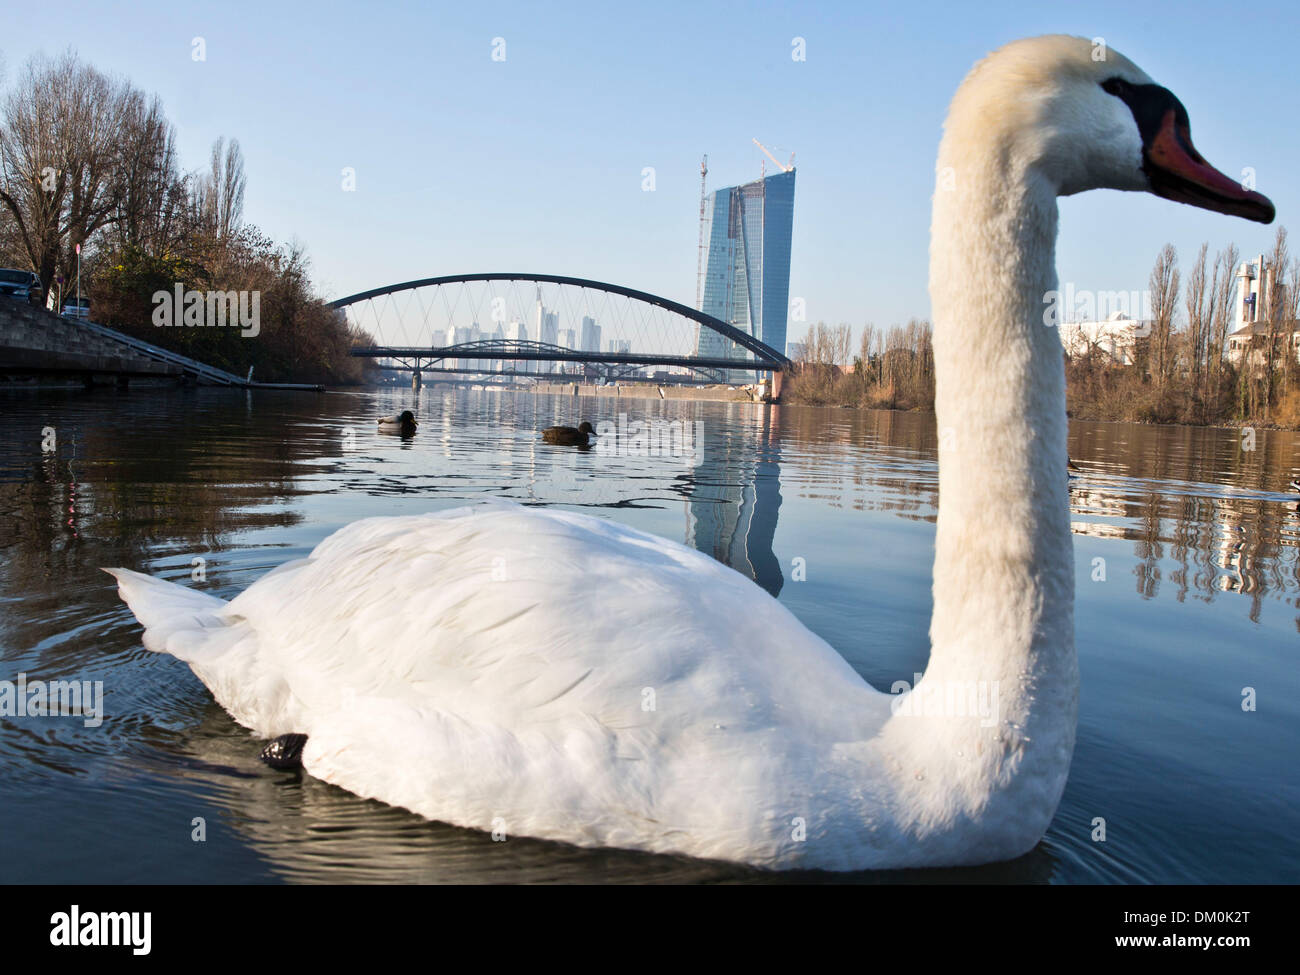 A swan swims in front of the new bridge 'Osthafenbruecke' which was opened for traffic today in Frankfurt Main, Germany, 10 December 2013. The future headquarters of the European Central Bank ECB are pictured in the background. About 17,000 cars are expected to cross the 175 meters long steel bridge every day. Photo: Frank Rumpenhorst/dpa Stock Photo